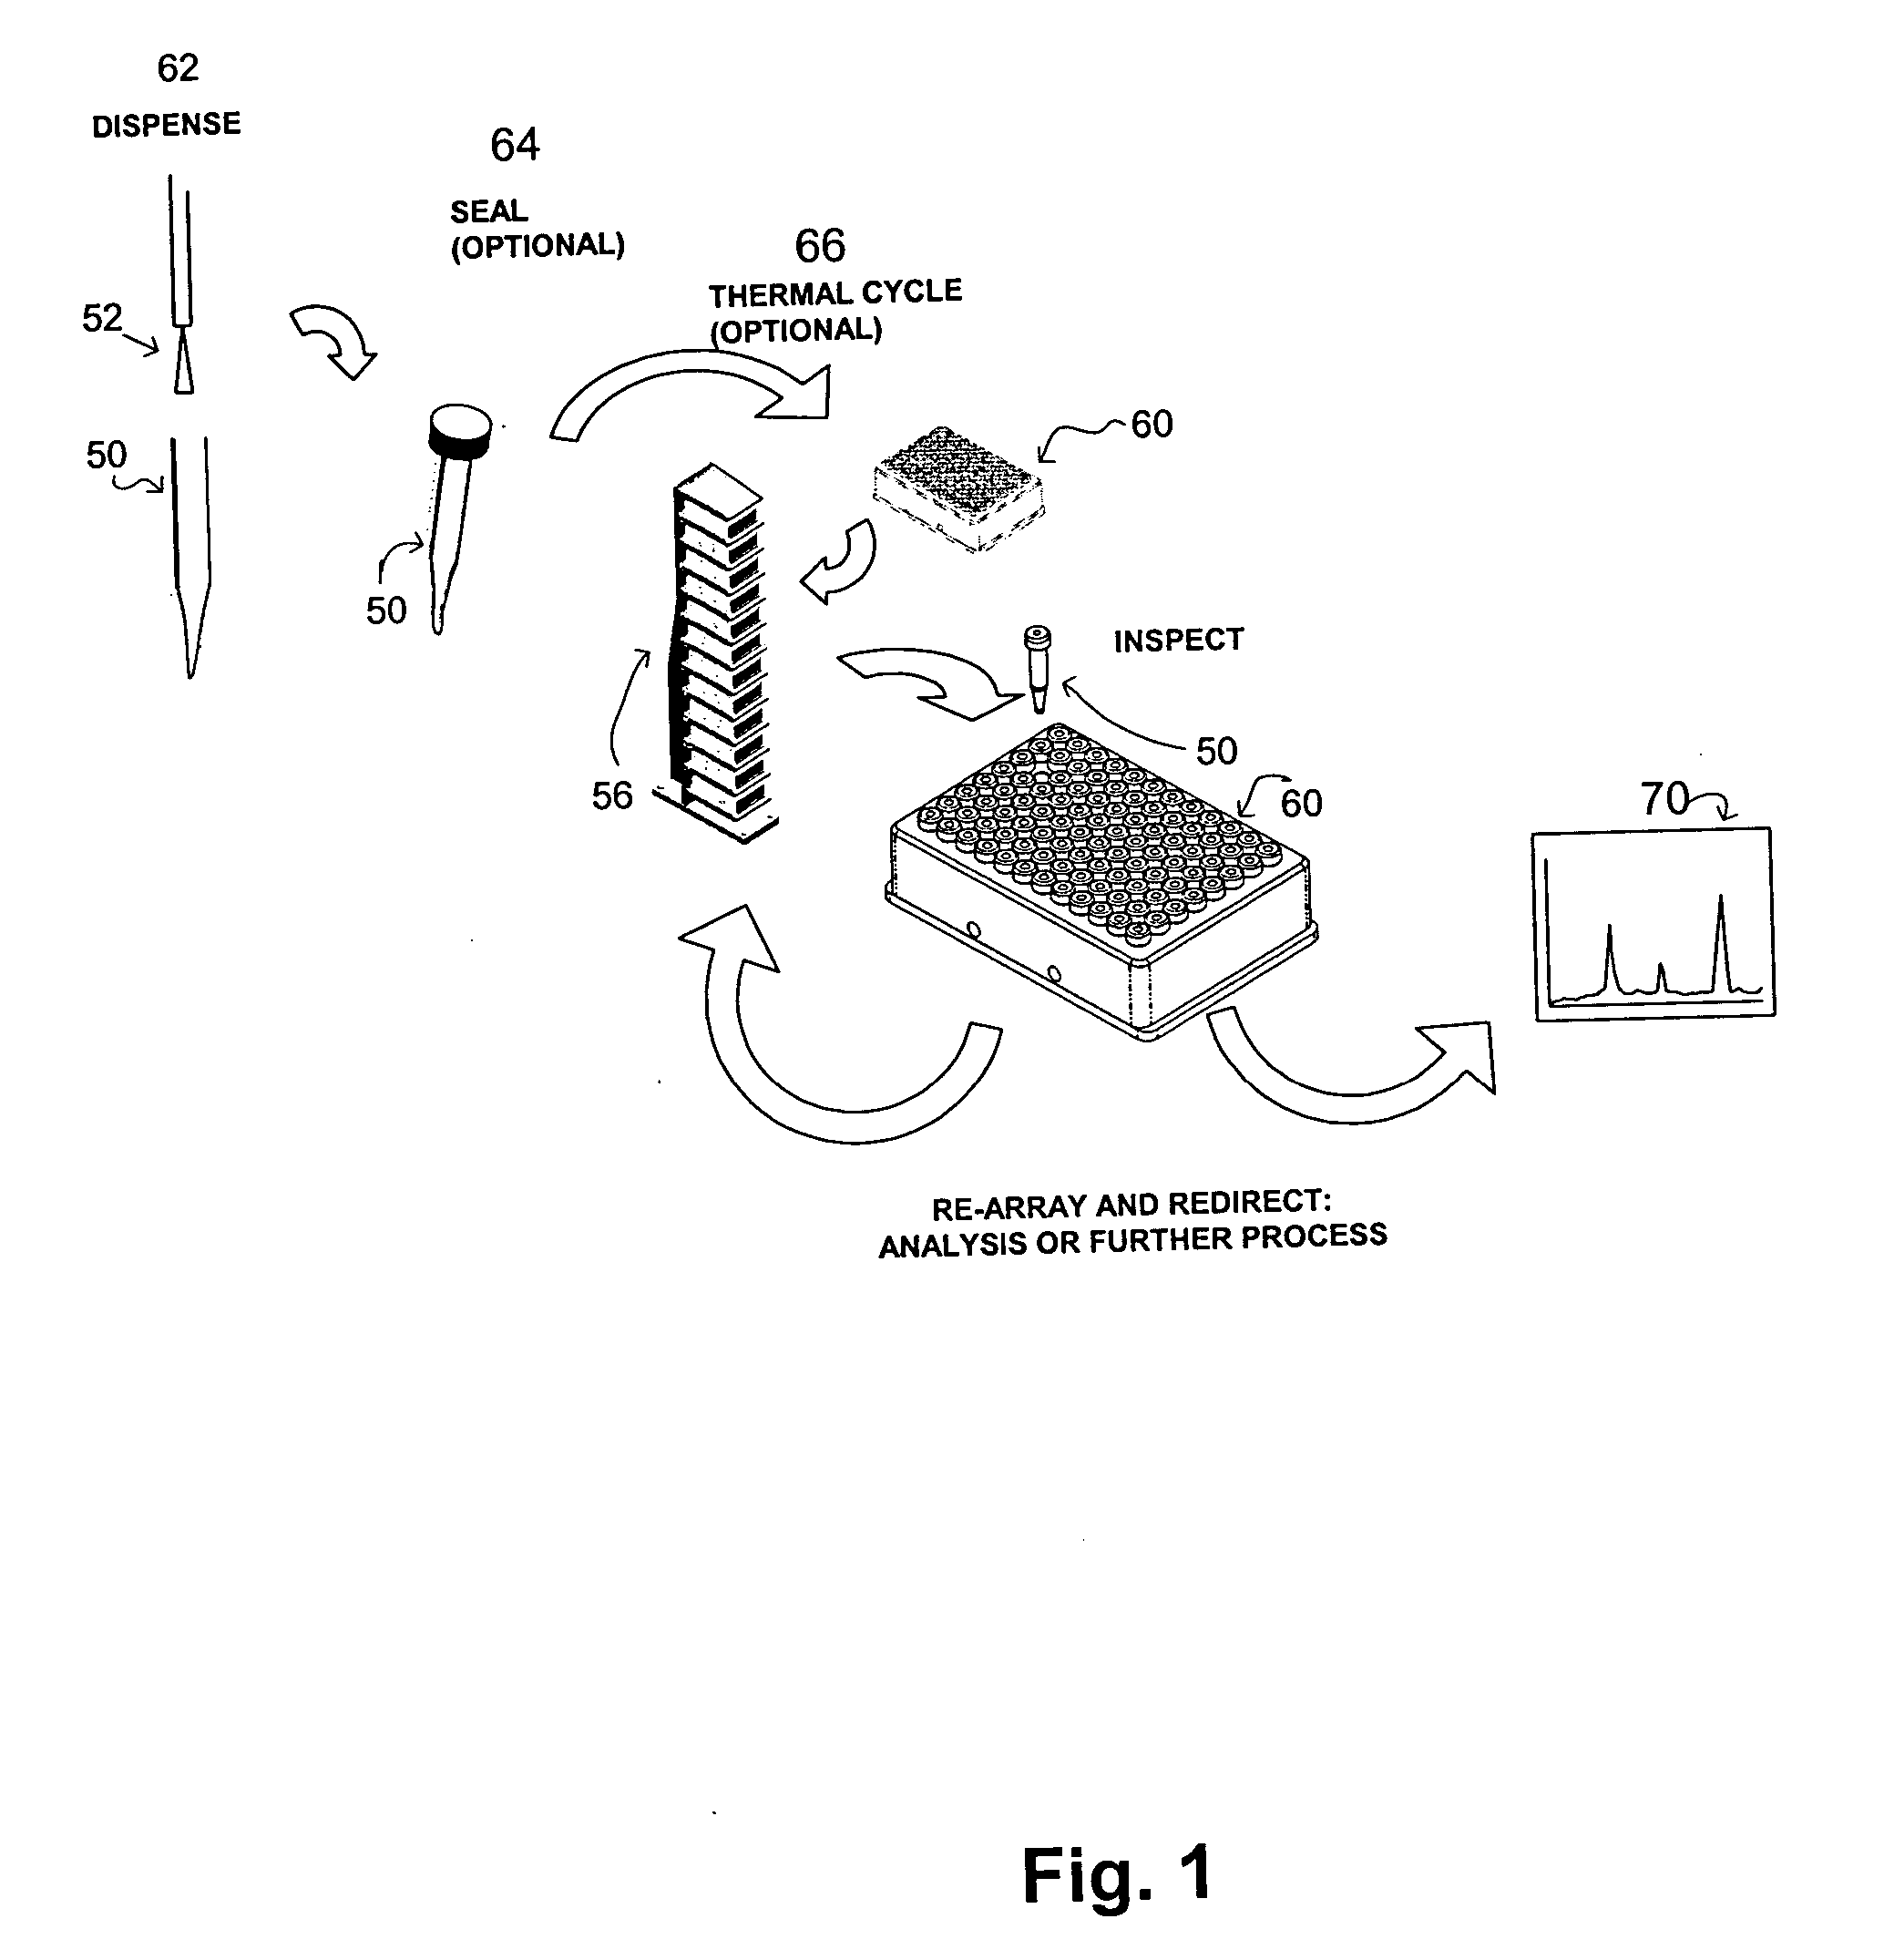 Apparatus and method for high-throughput preparation and spectroscopic classification and characterization of compositions